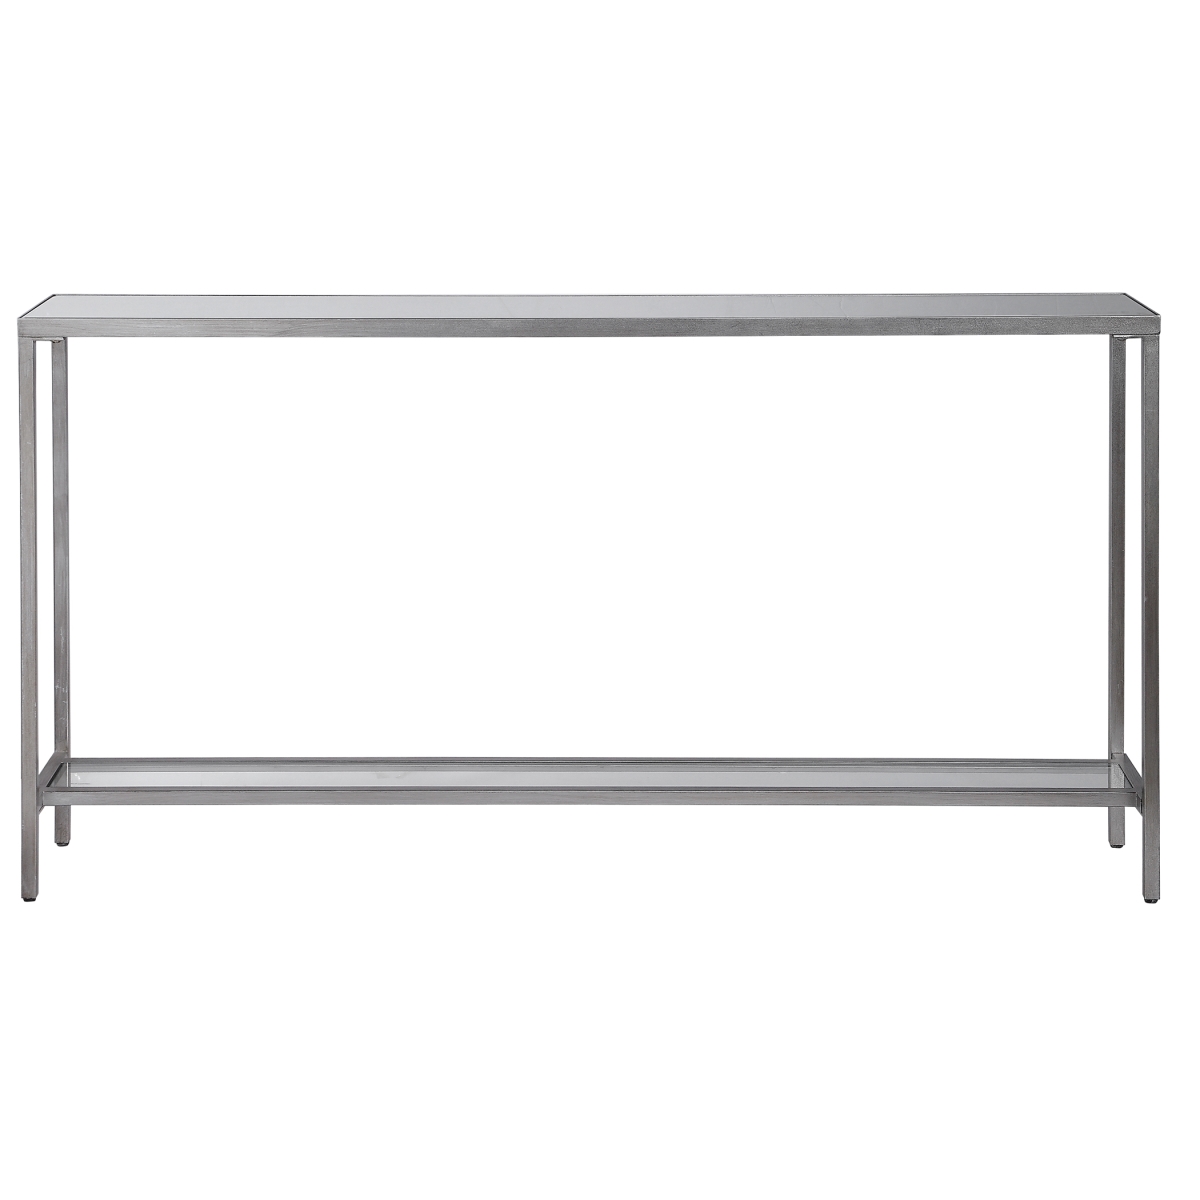 24913 Hayley Silver Console Table - 31 X 60 X 10 In.